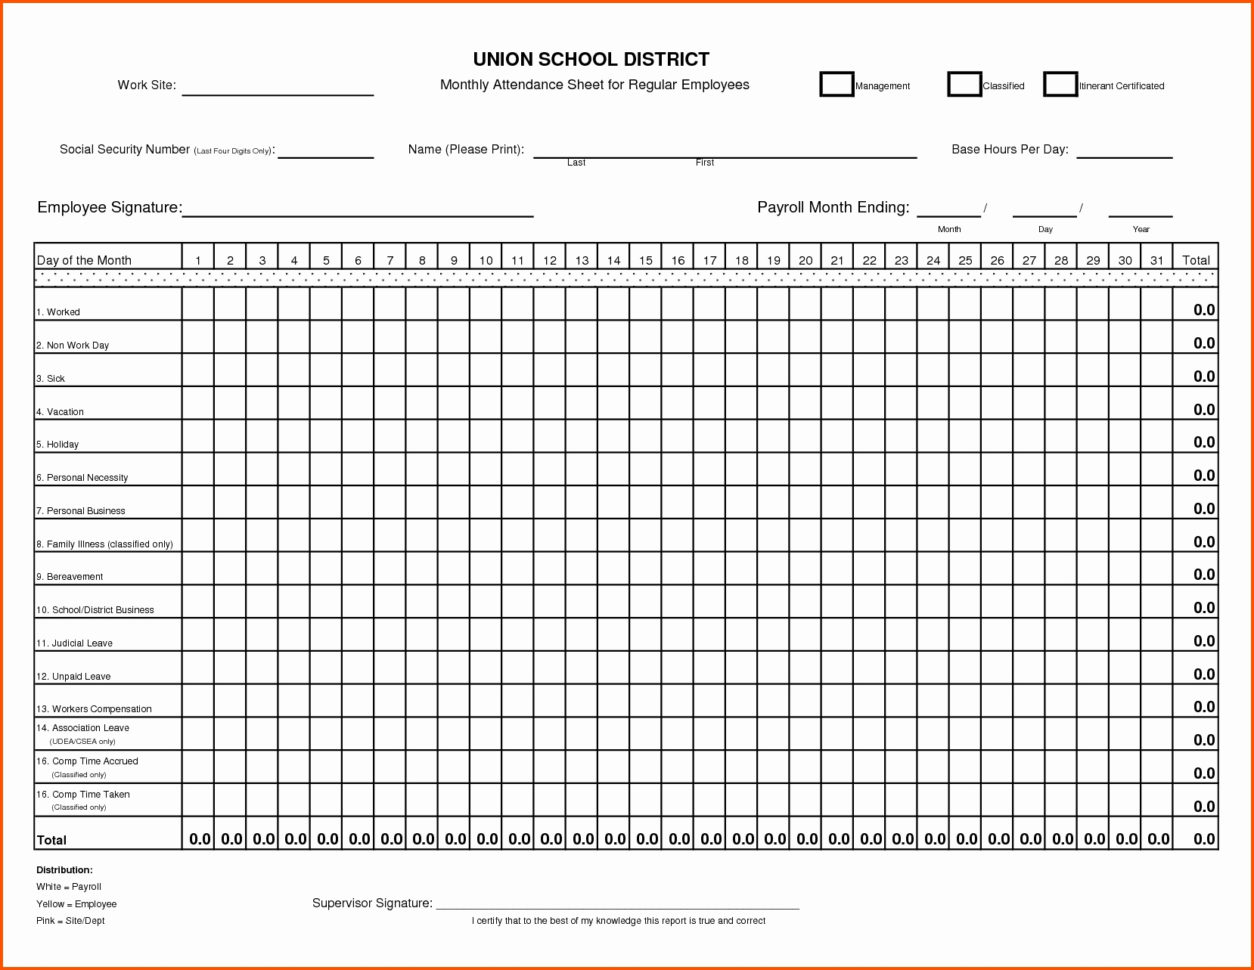 Comp Time Tracking Spreadsheet Download Spreadsheet Downloa comp time tracking ...